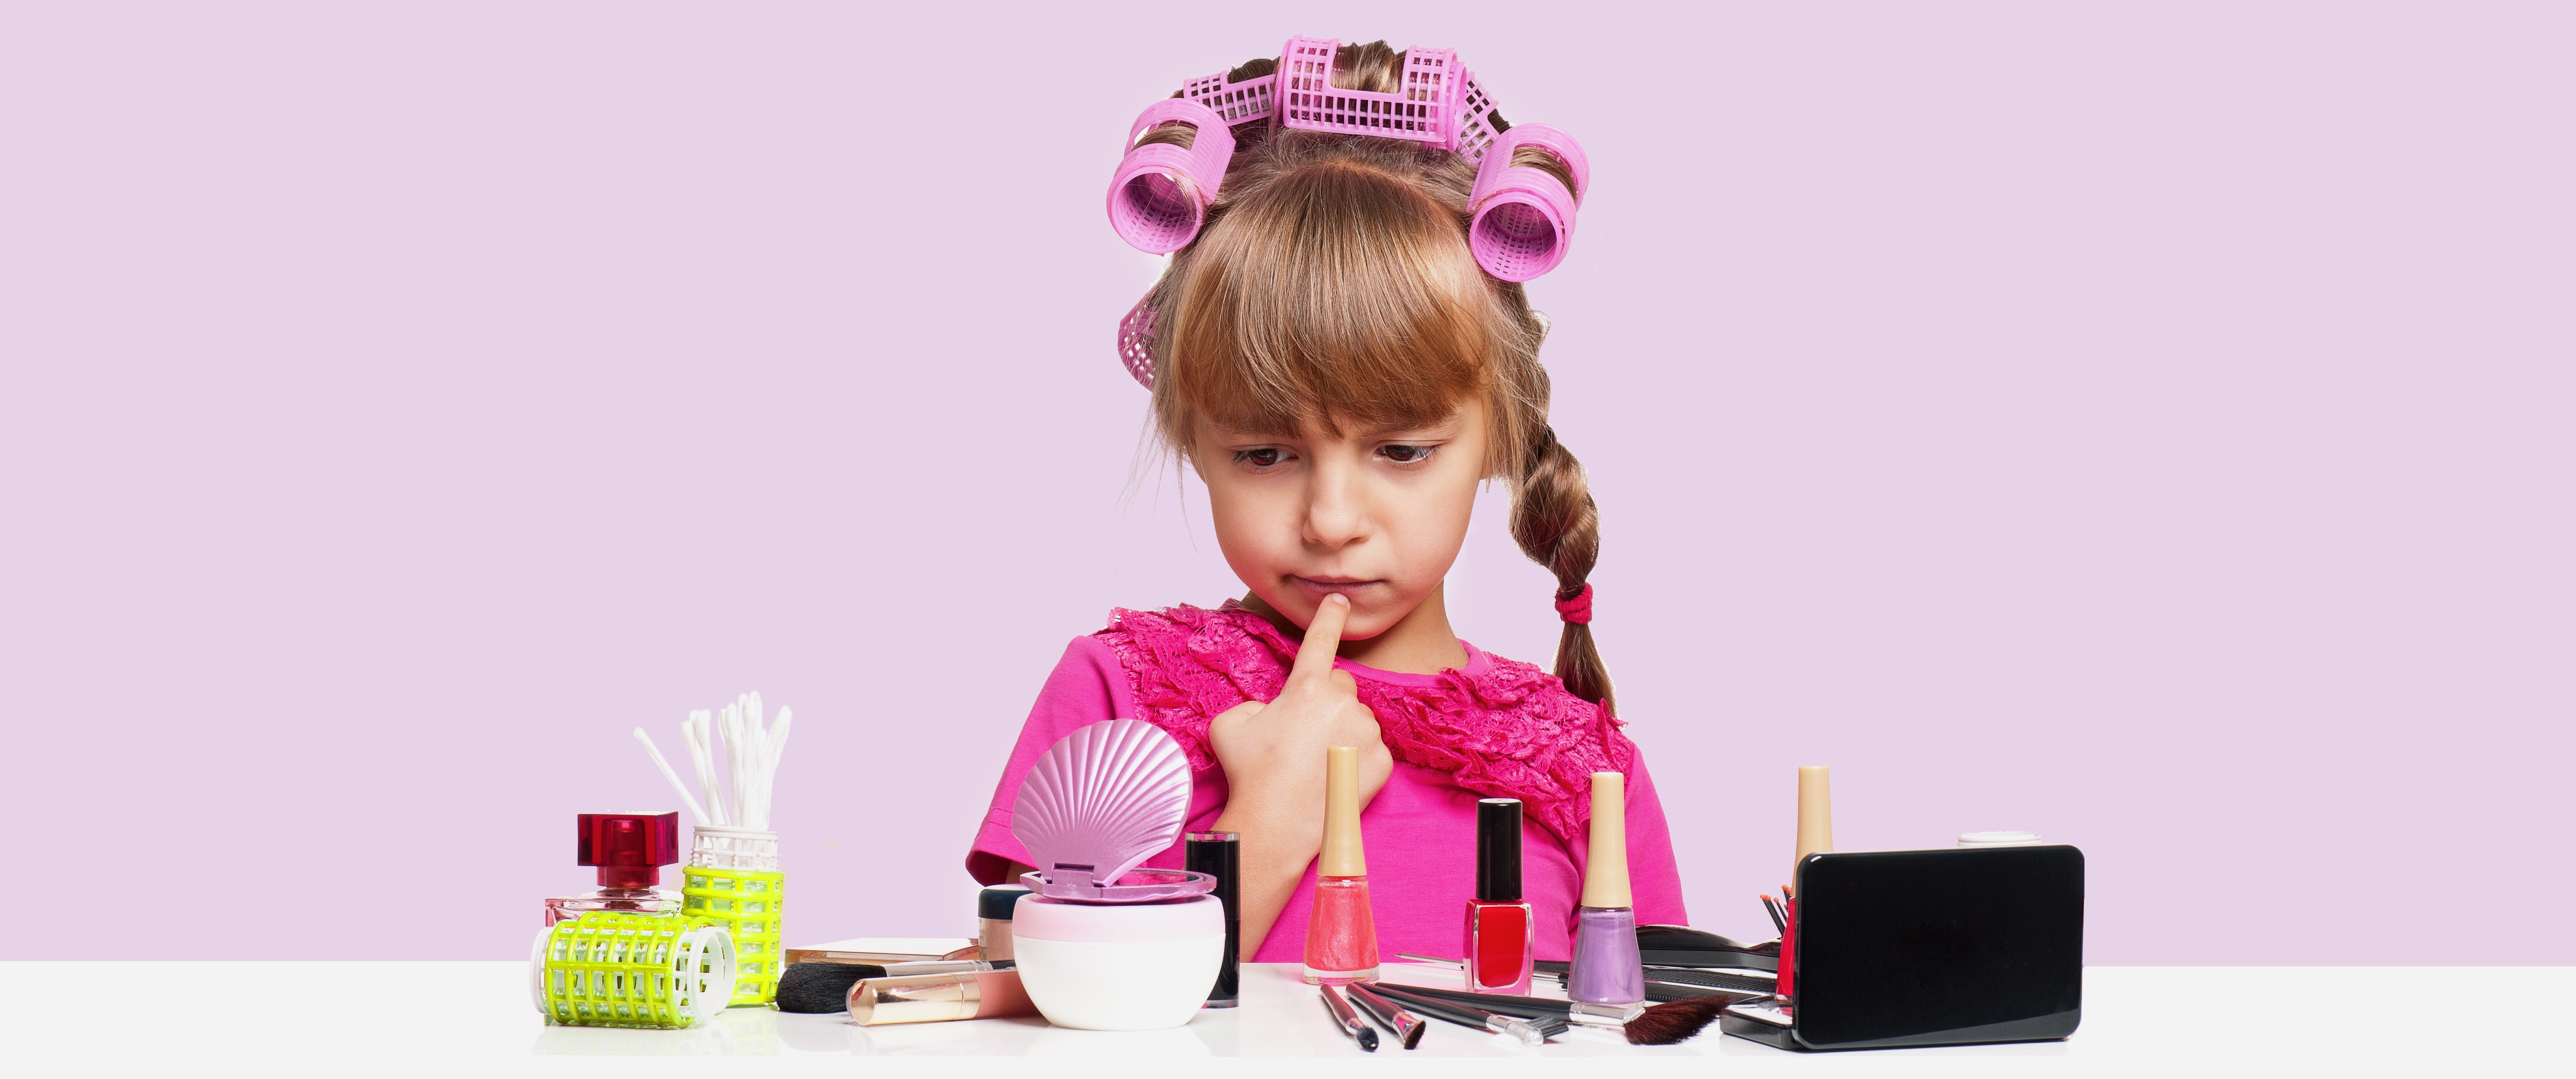 Child in hair curlers looking at different types of makeup products looking confused